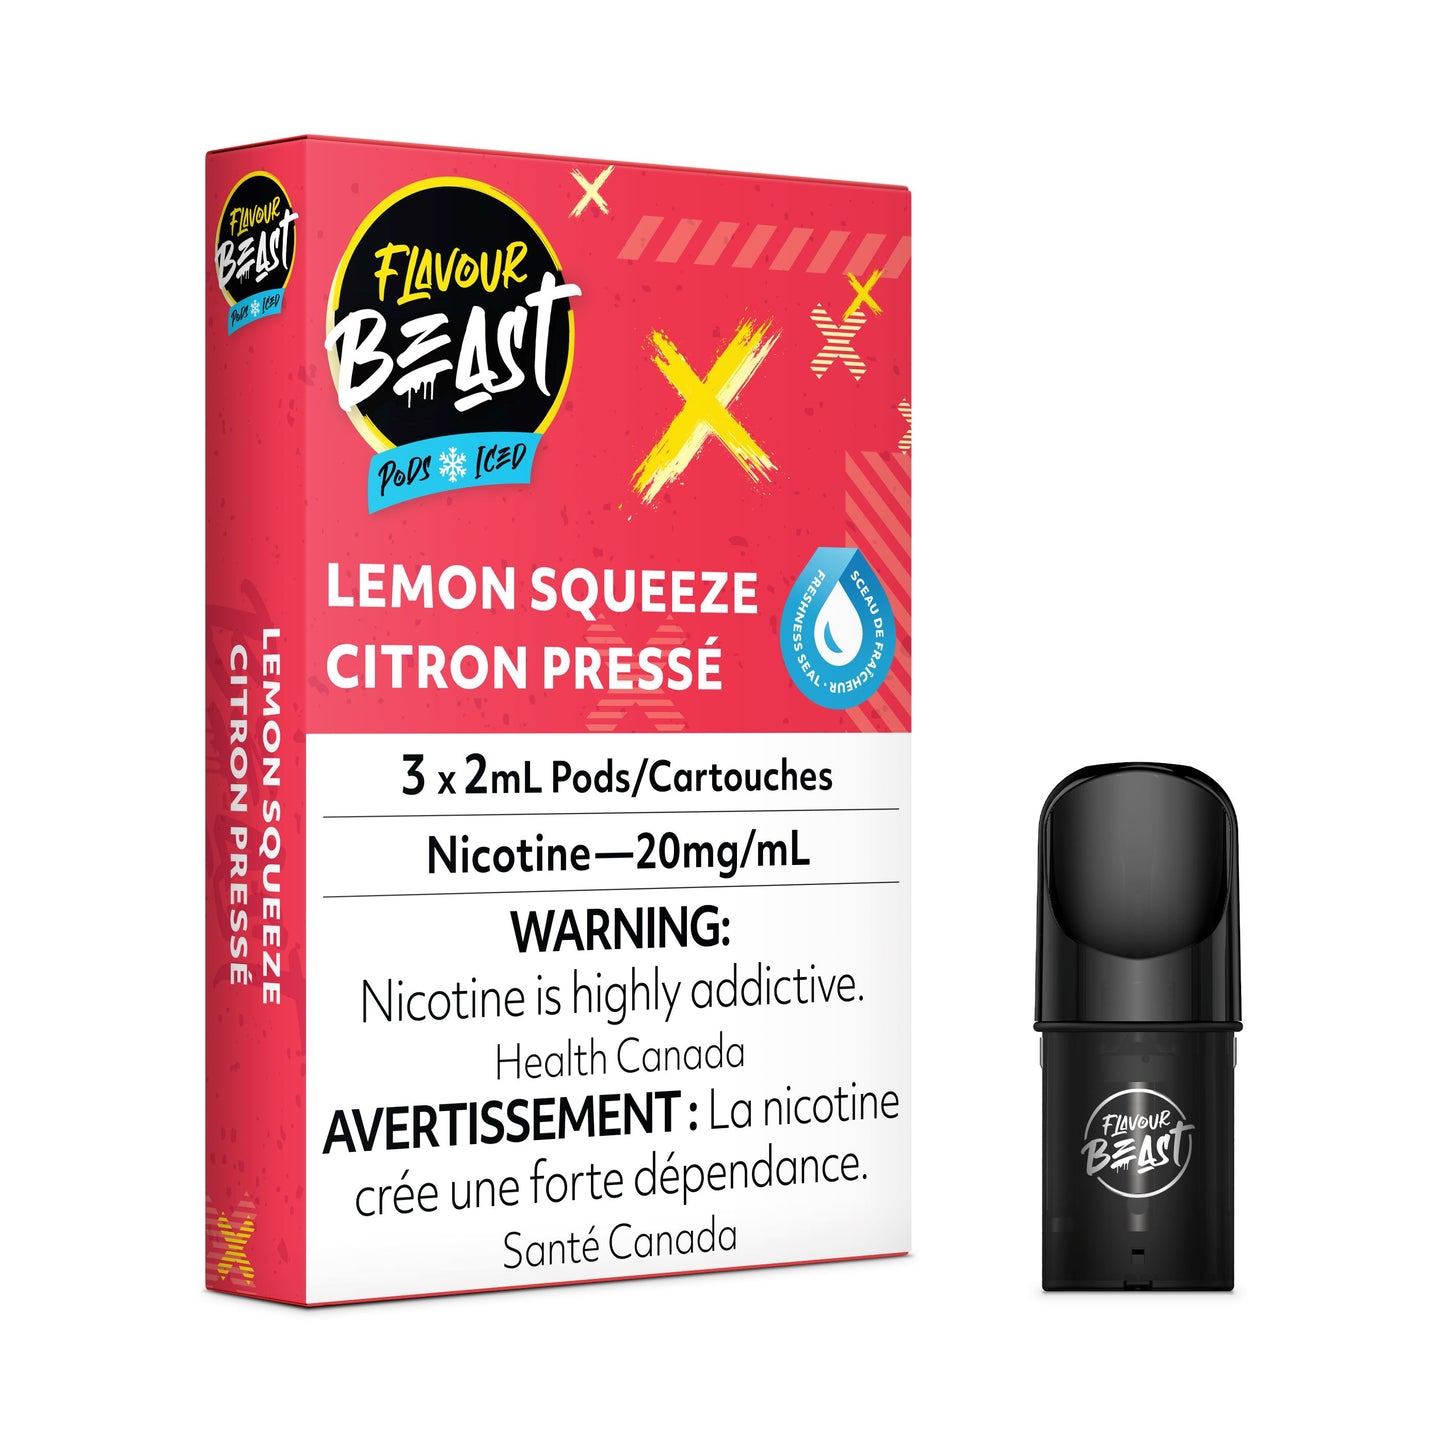 Lemon Squeeze Iced - FB CLOSED PODS Flavour Beast Flow 